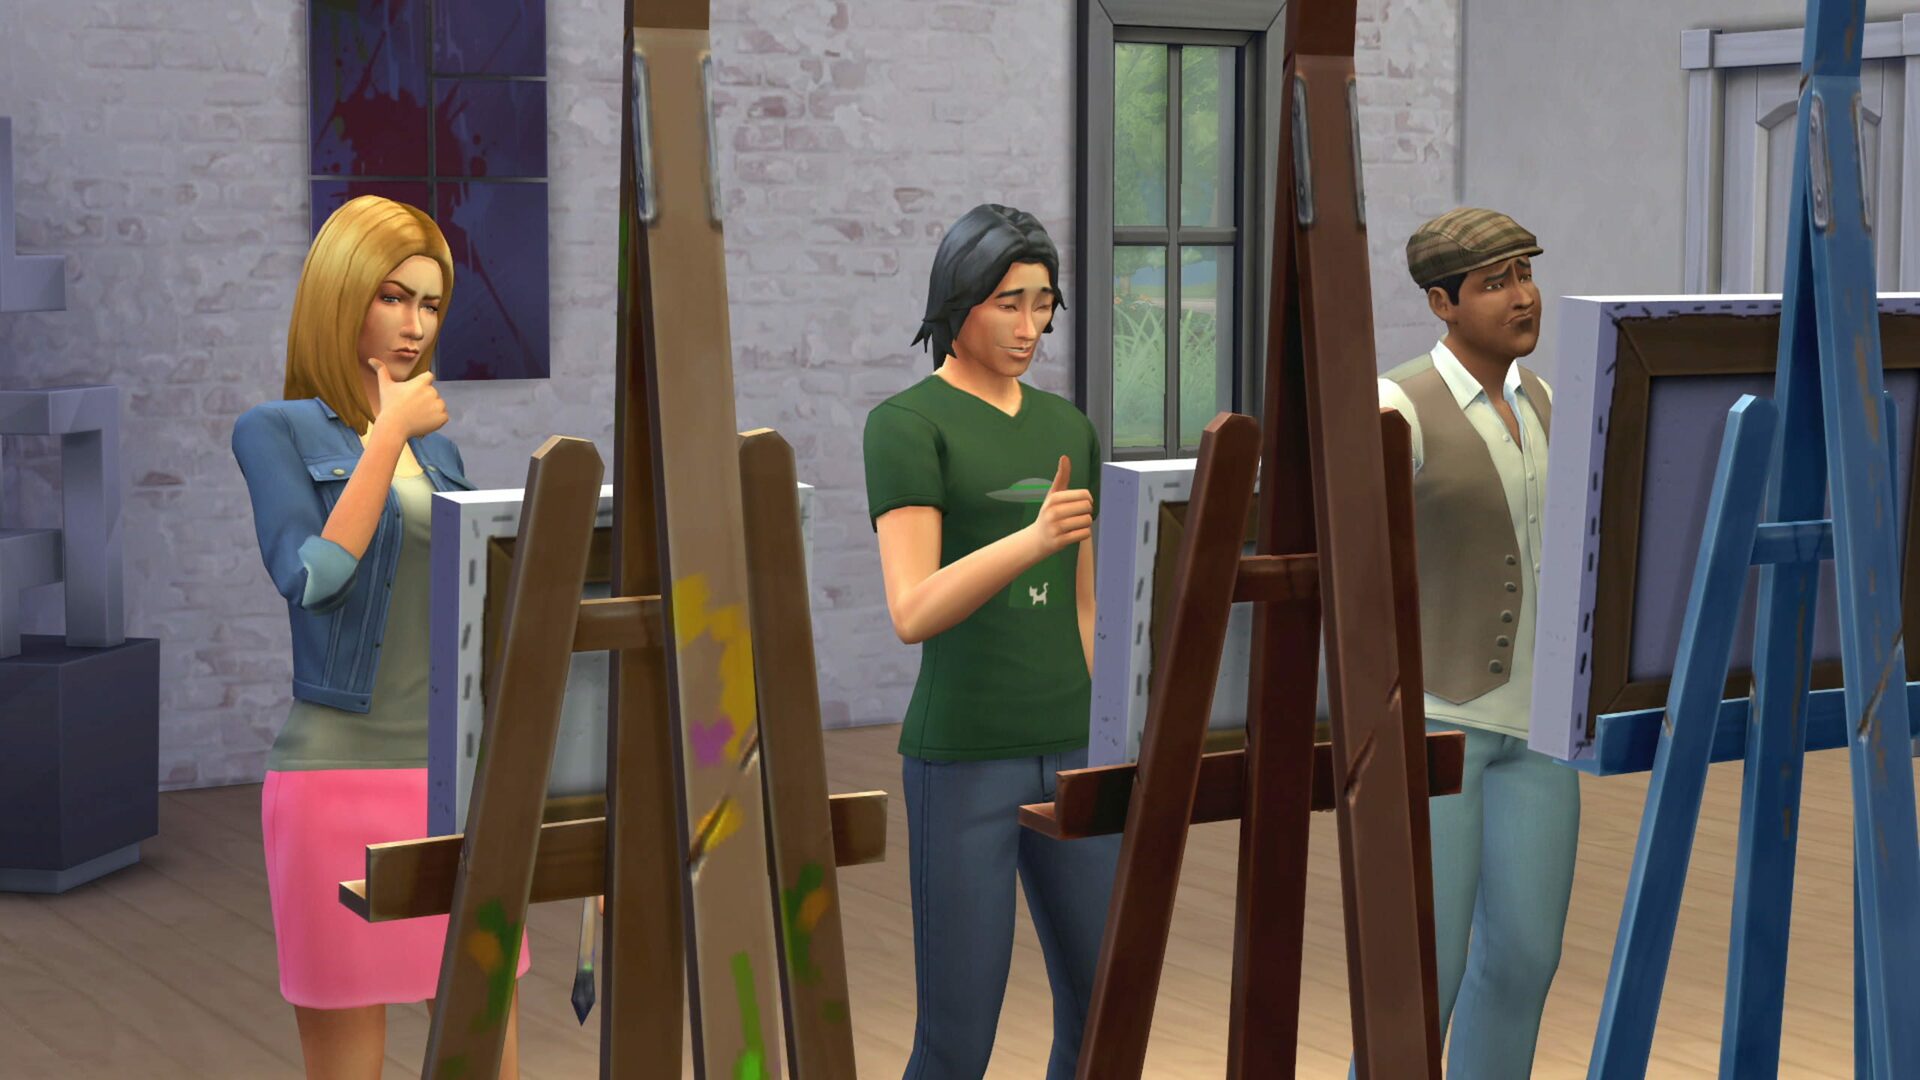 Sims2 characters standing next to a painting board